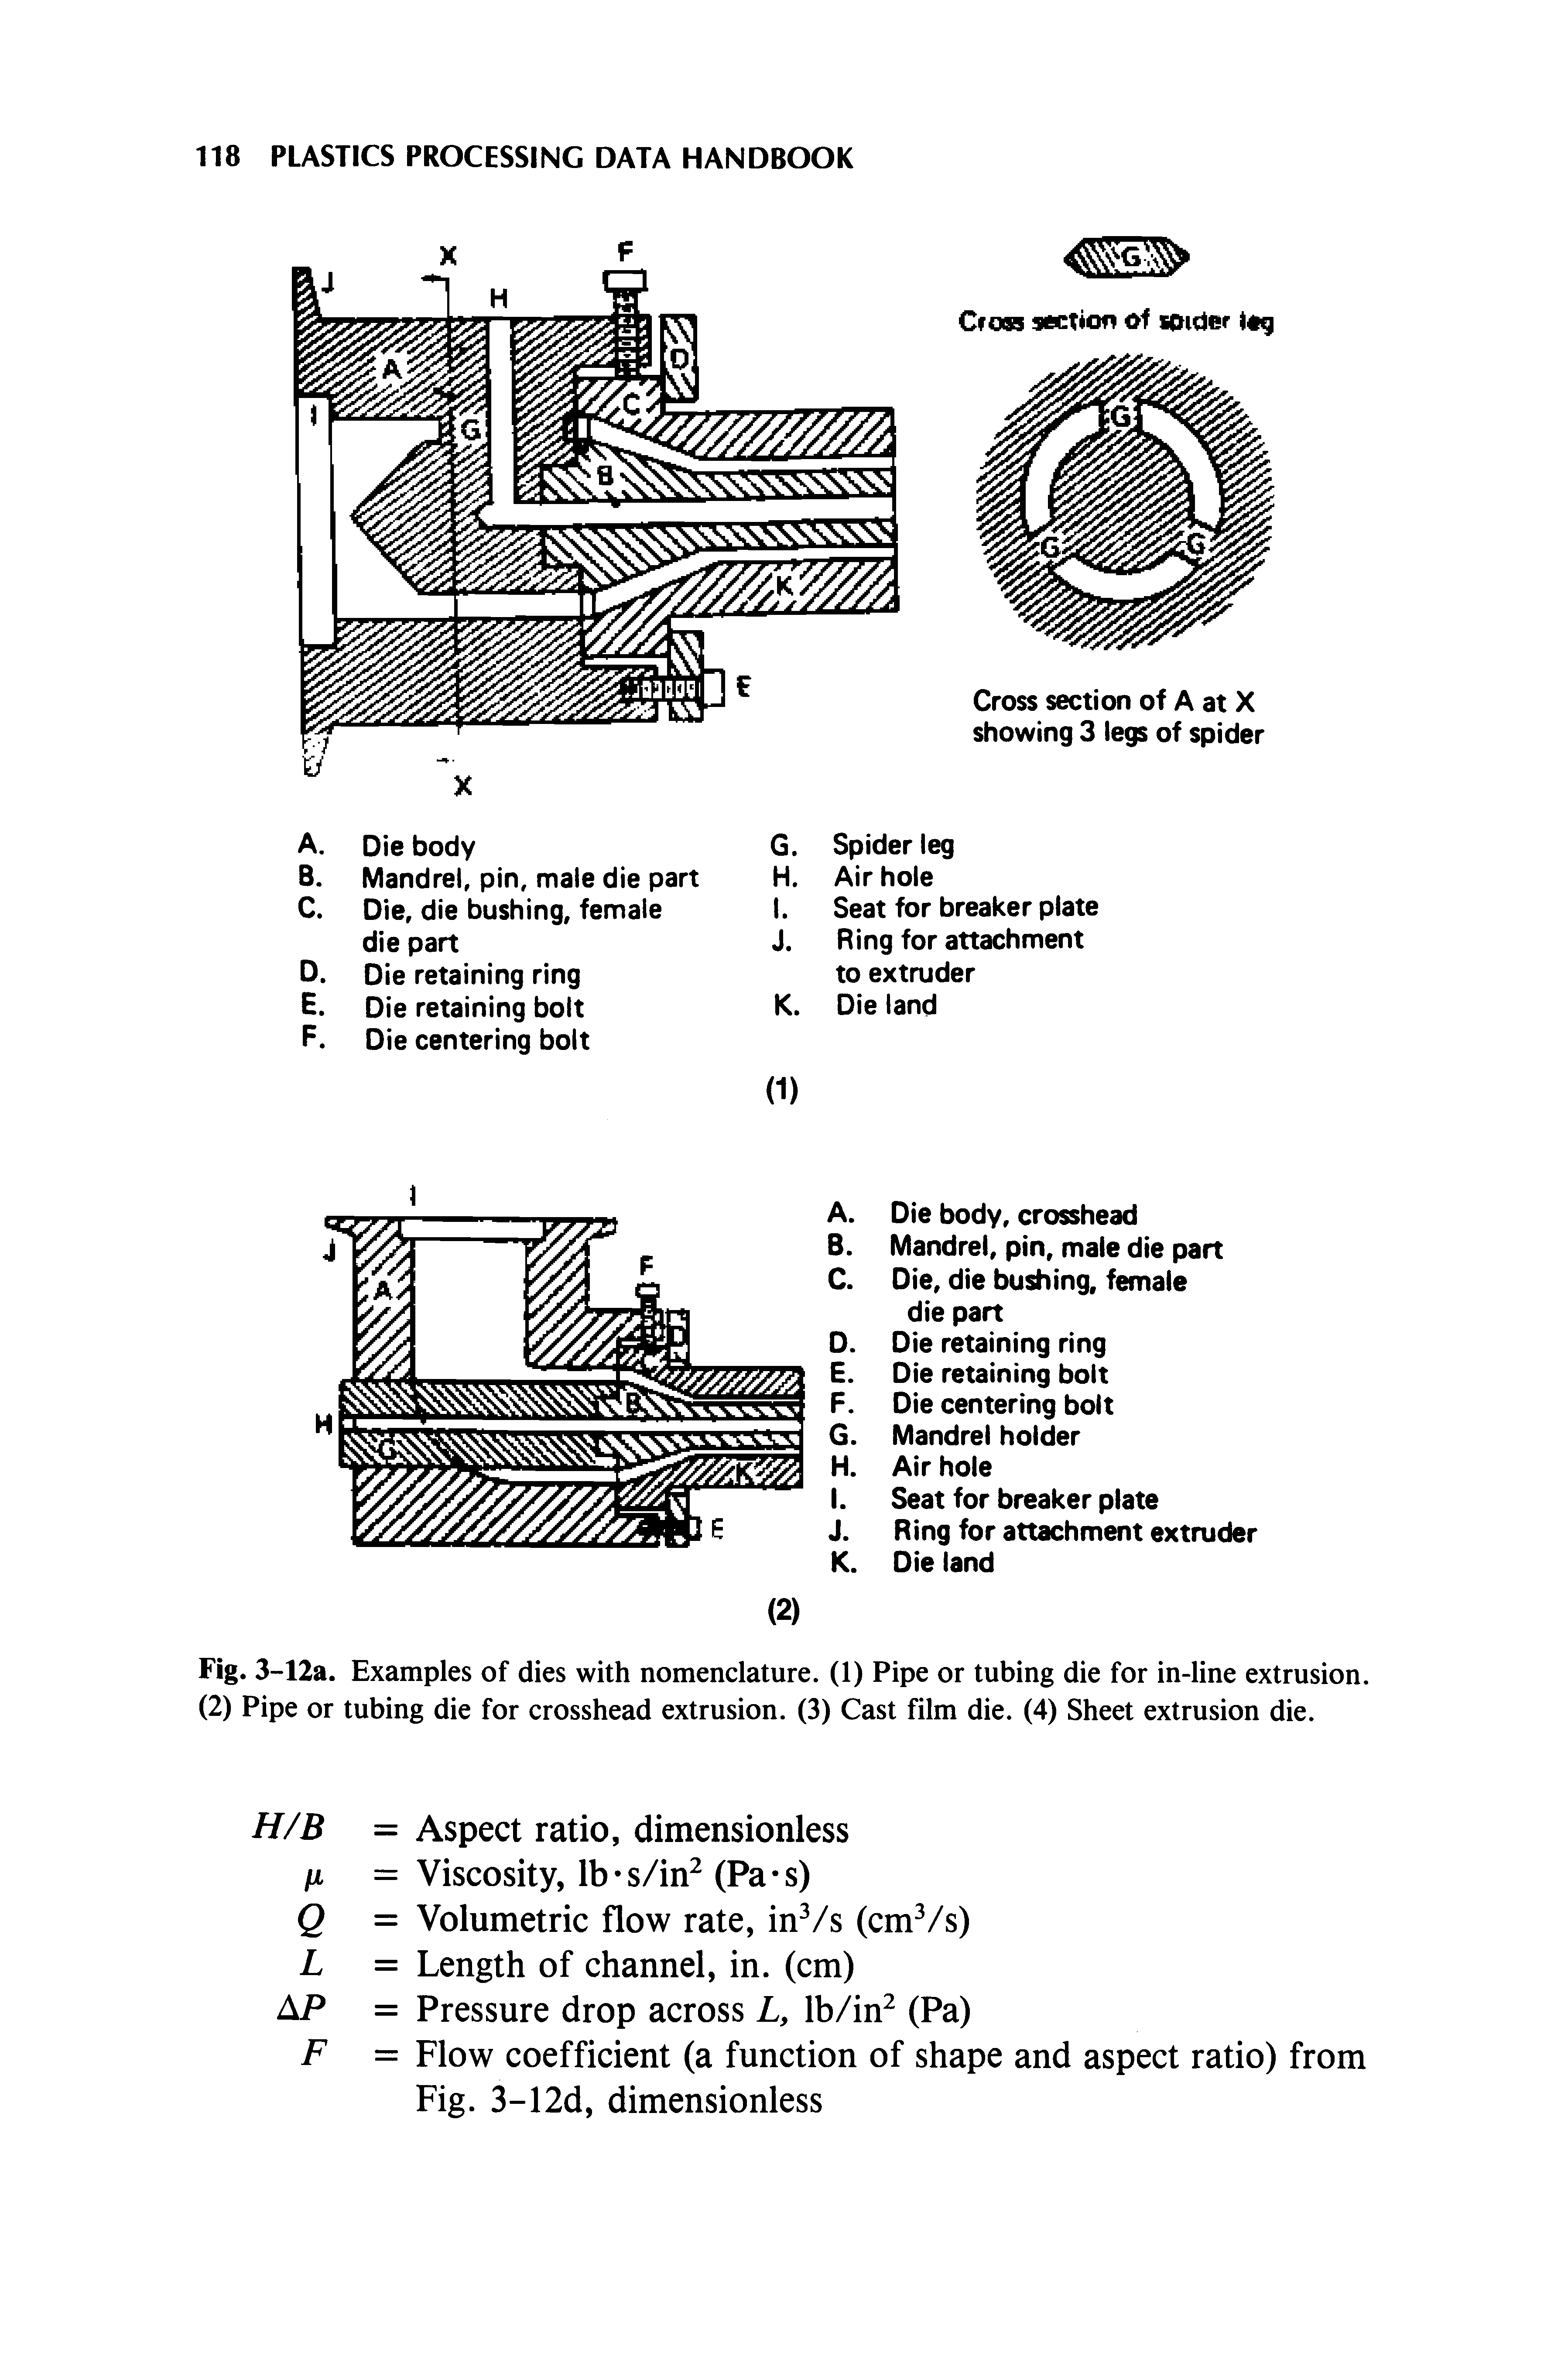 Fig. 3-12a. Examples of dies with nomenclature. (1) Pipe or tubing die for in-line extrusion. (2) Pipe or tubing die for crosshead extrusion. (3) Cast film die. (4) Sheet extrusion die.